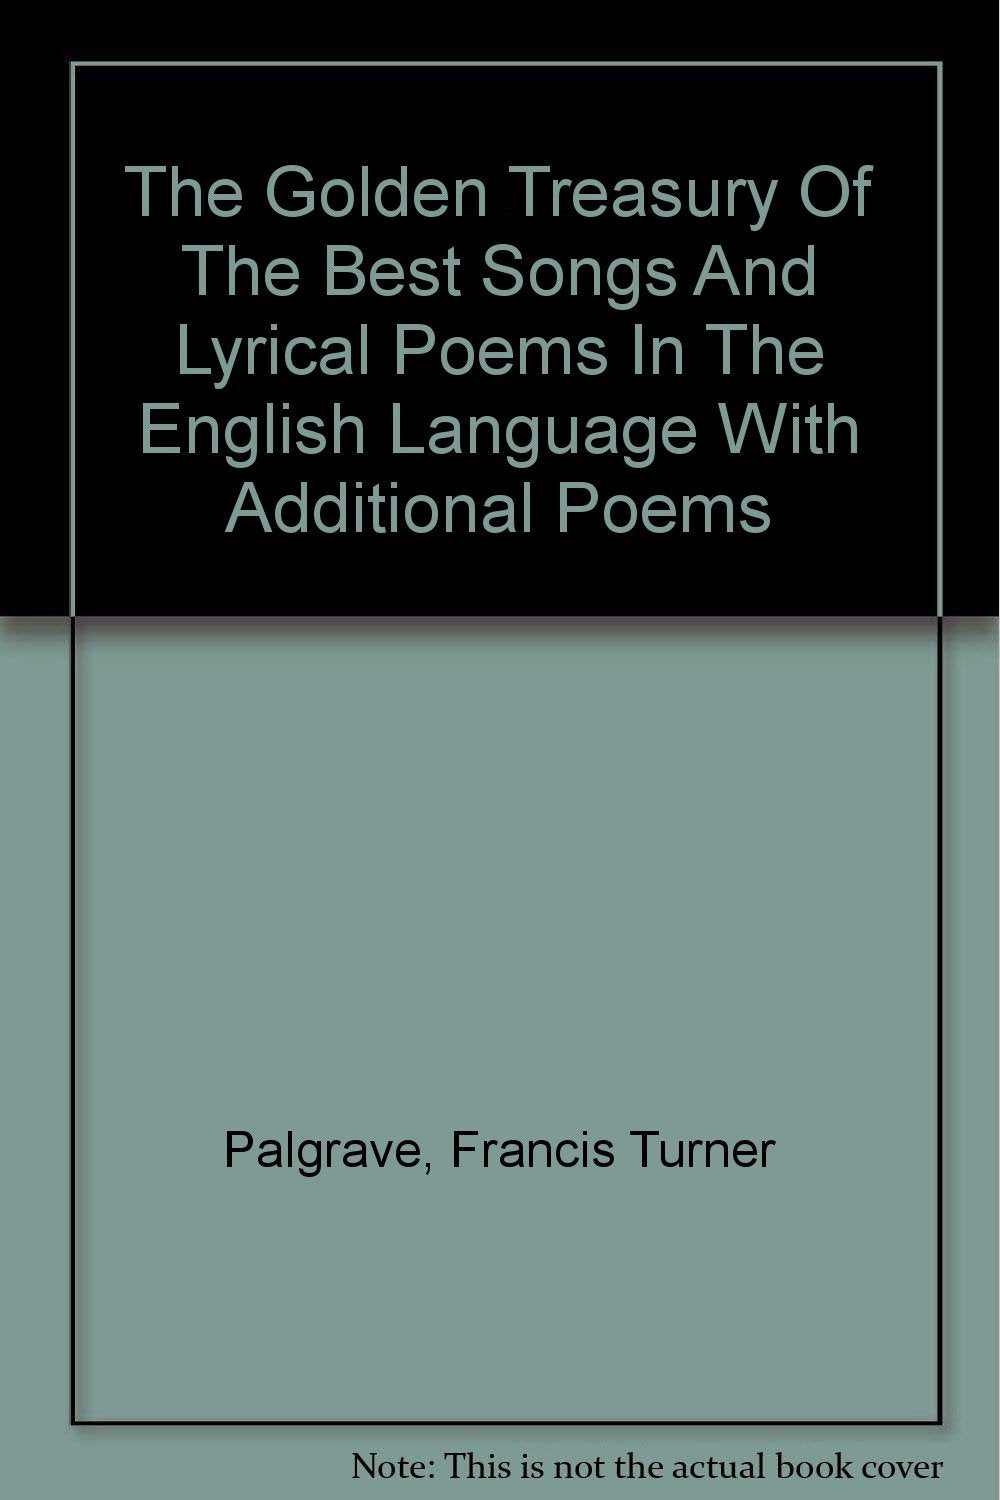 The Golden Treasury Of The Best Songs And Lyrical Poems In The English Language With Additional Poems [Hardcover] Palgrave, Francis Turner